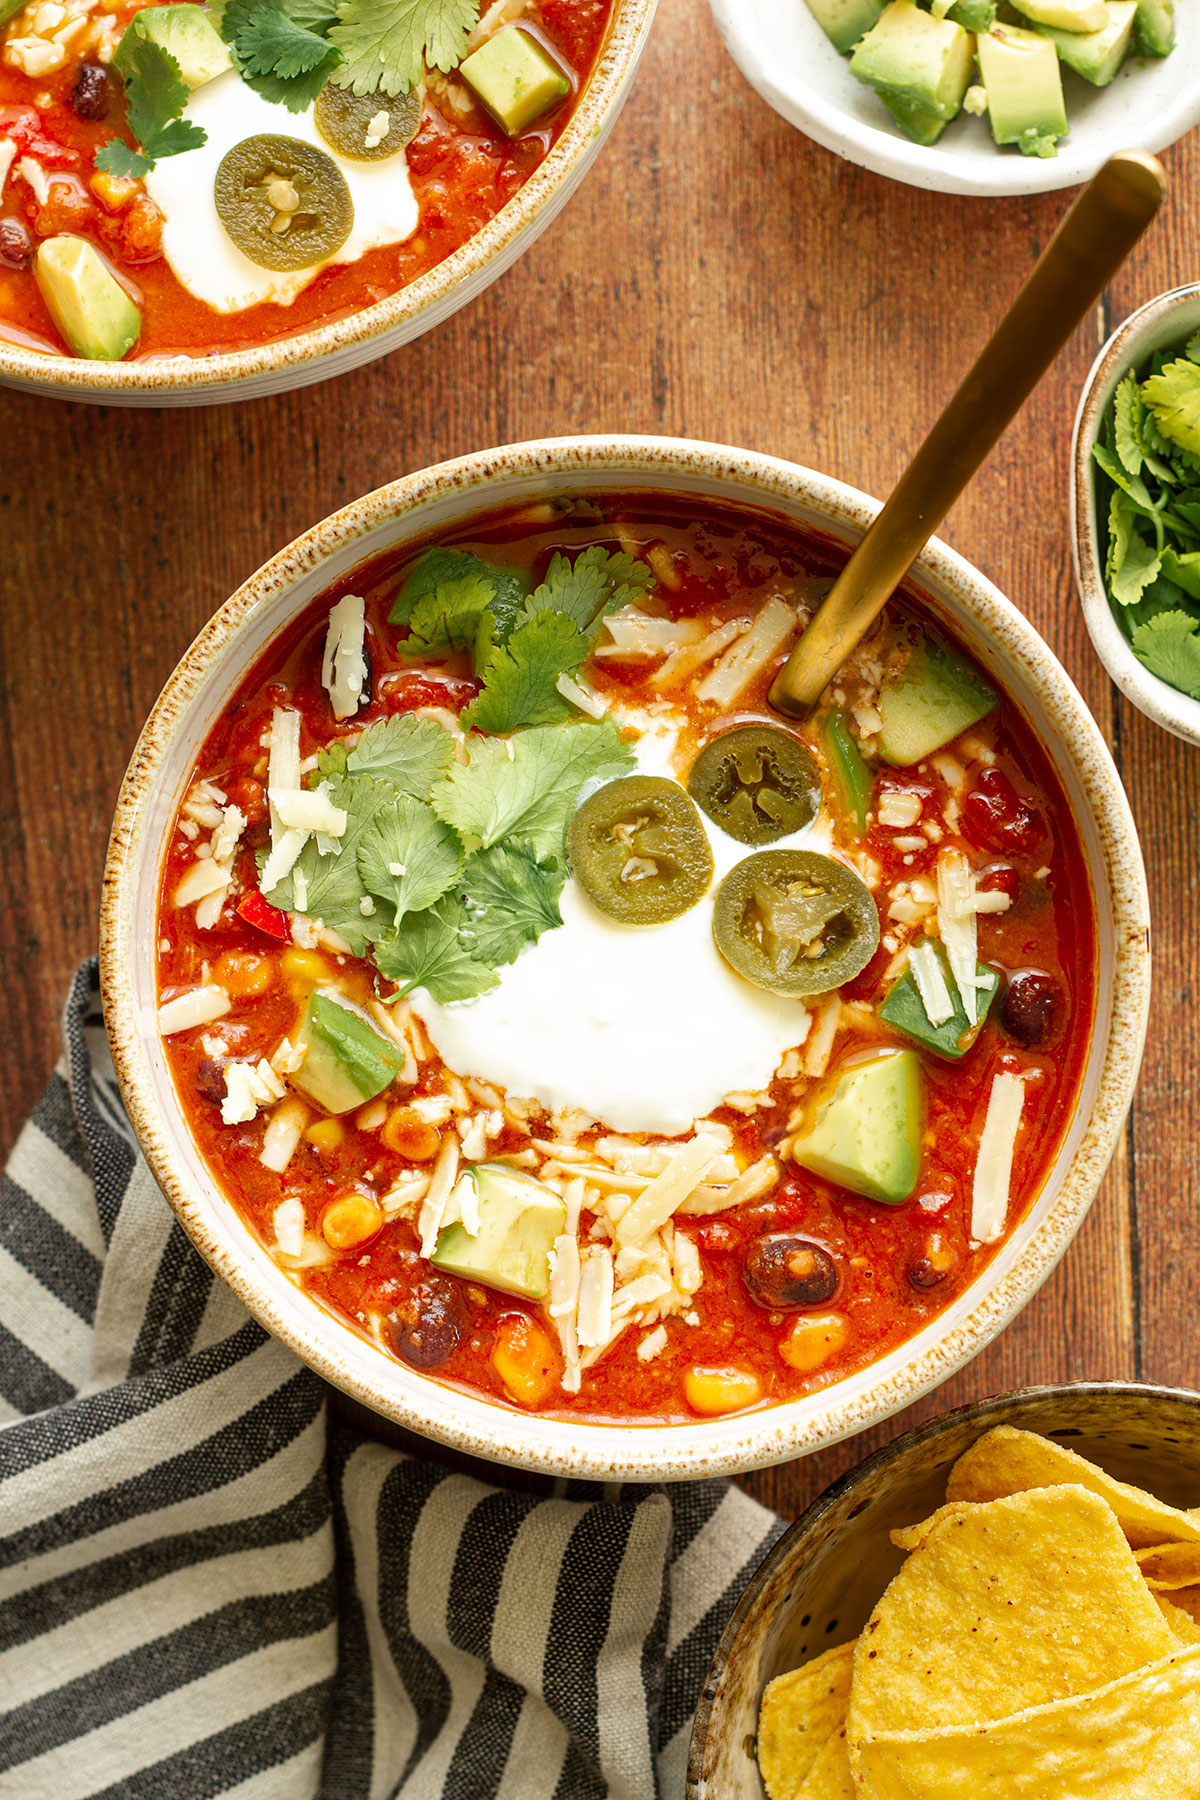 A bowl of Mexican Bean Soup on a wooden table background with Jalapeno, cilantro, cheese and avocado toppings and side dishes of chopped avocado, cilantro and tortilla chips.